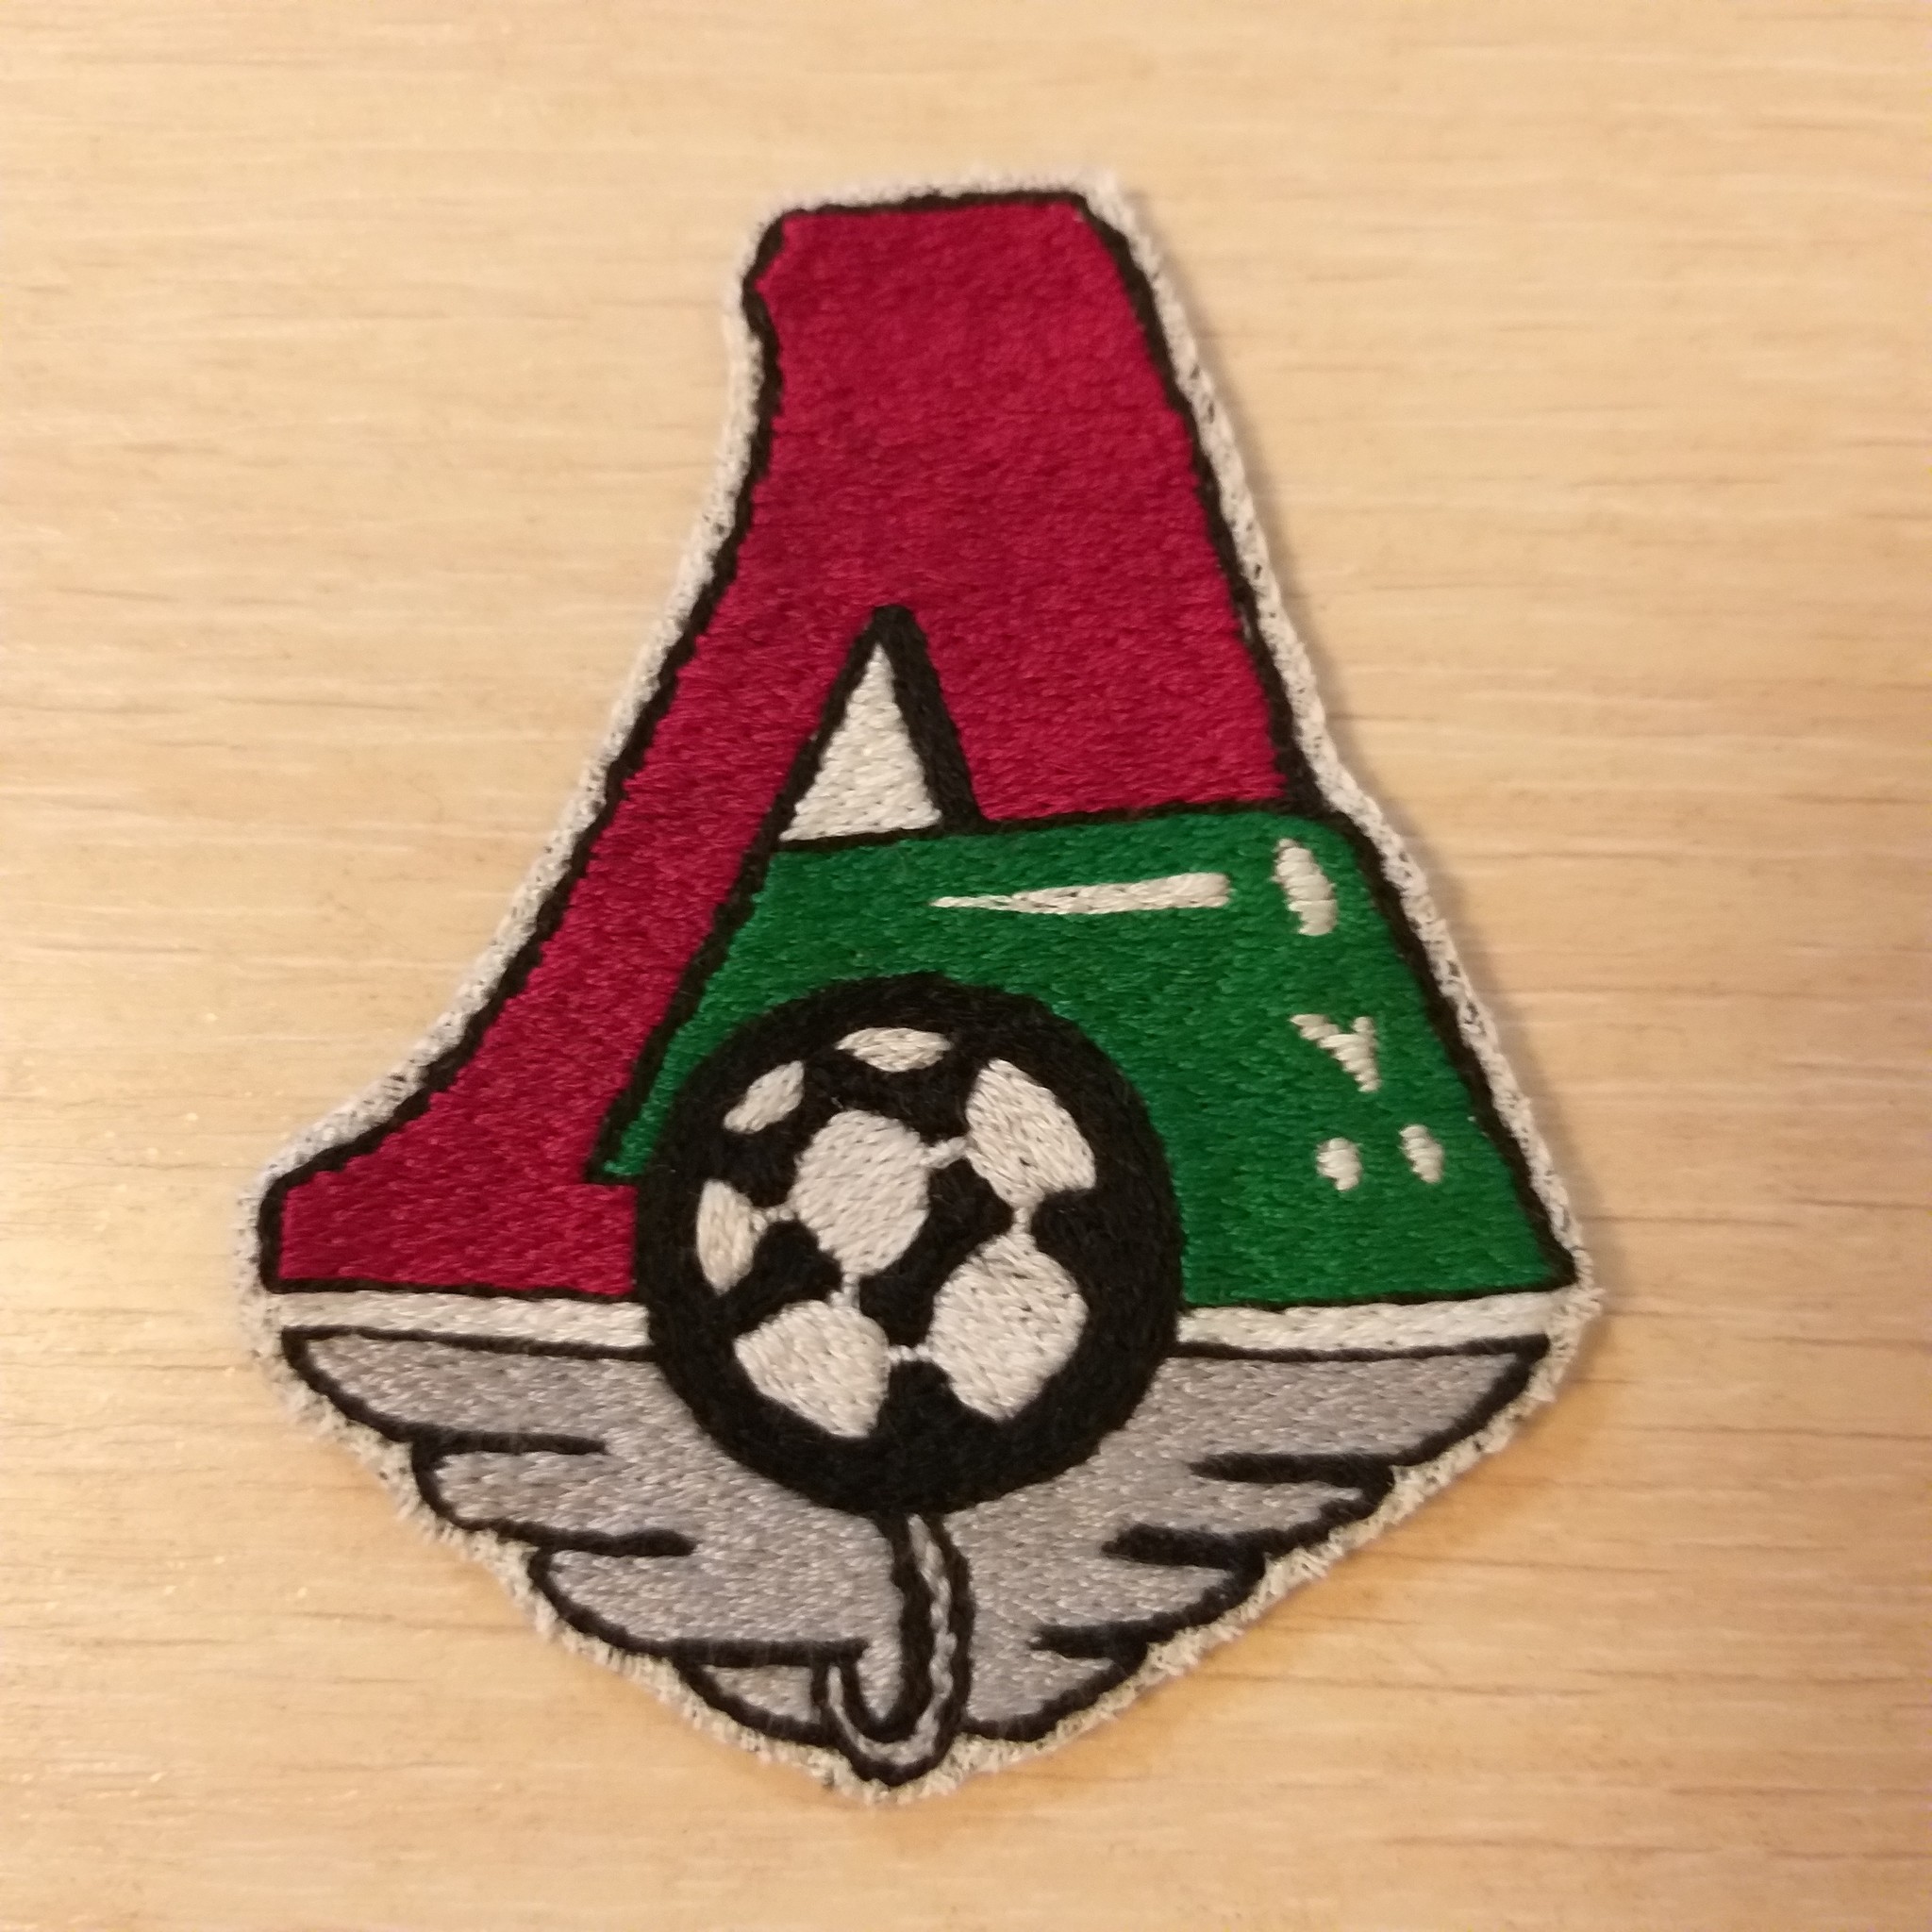 When you live with a Lokomotiv fan - My, Embroidery, Stripe, Locomotive, FC Lokomotiv, With your own hands, Needlework without process, Football